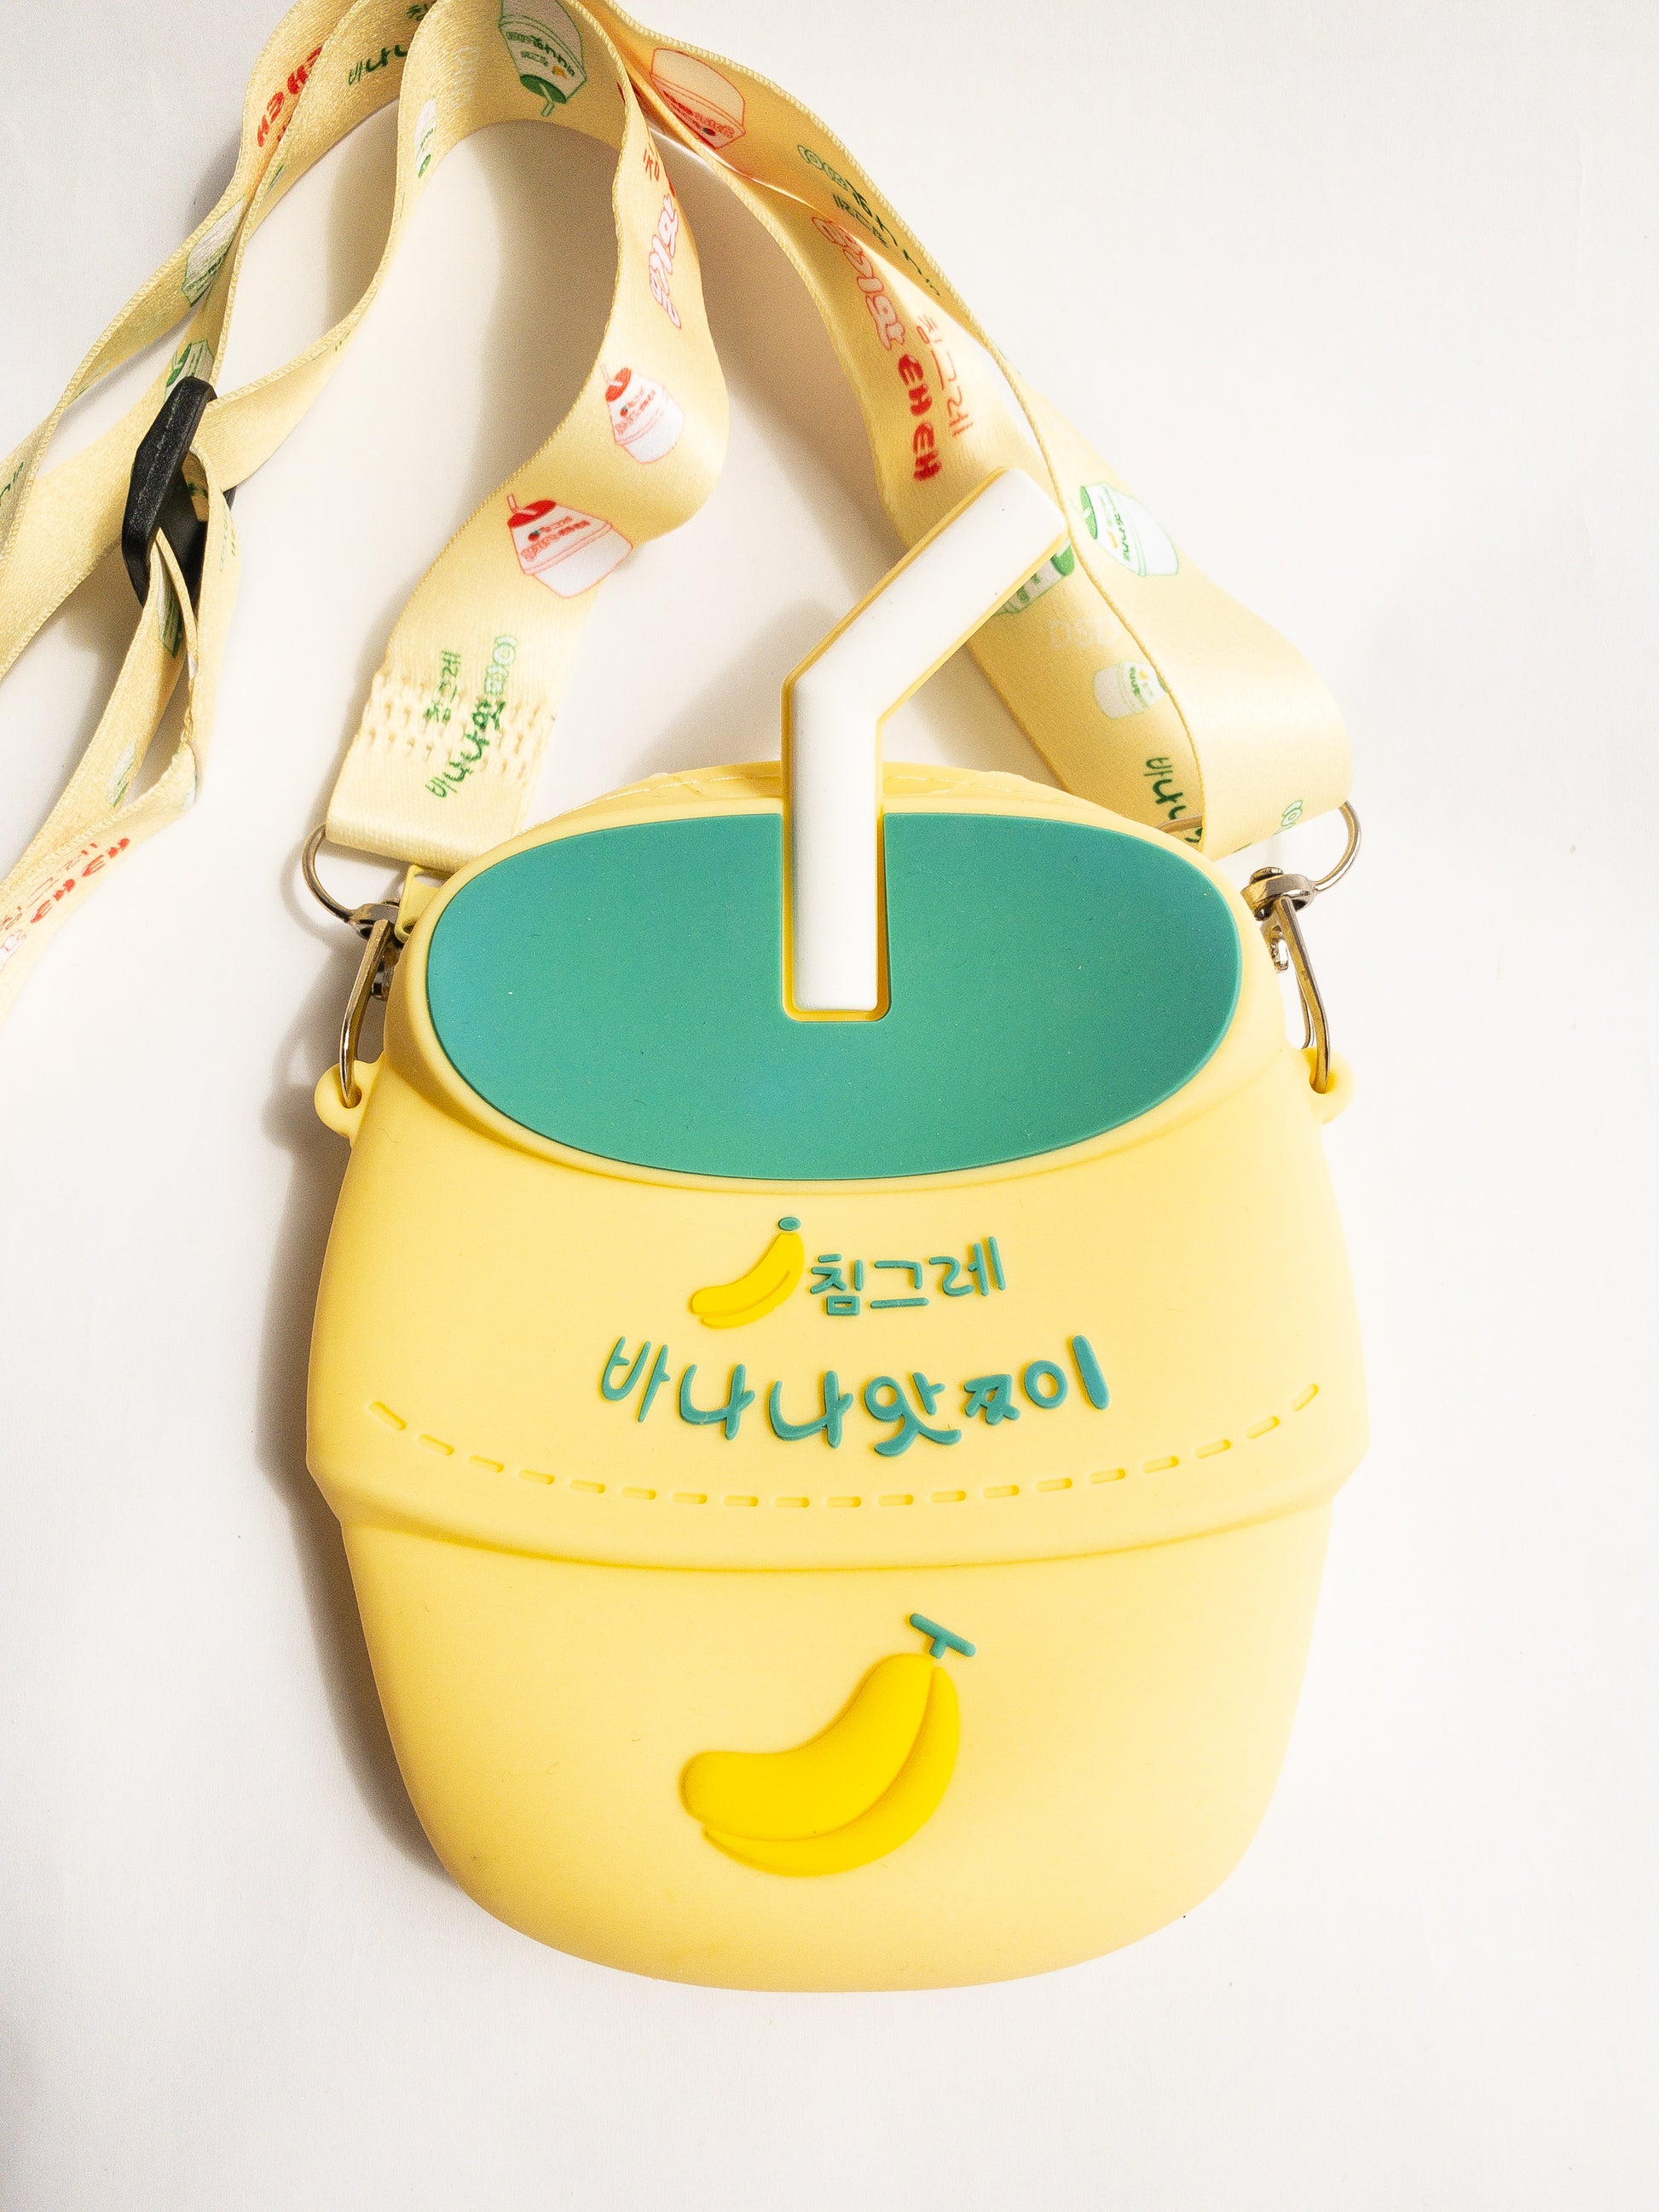 A bag shaped like your favorite childhood (and current!) beverage. This banana milk shaped bag is made of smooth silicone. It has one zip open with an adjustable fabric and removable strap. Sure to be a big hit!